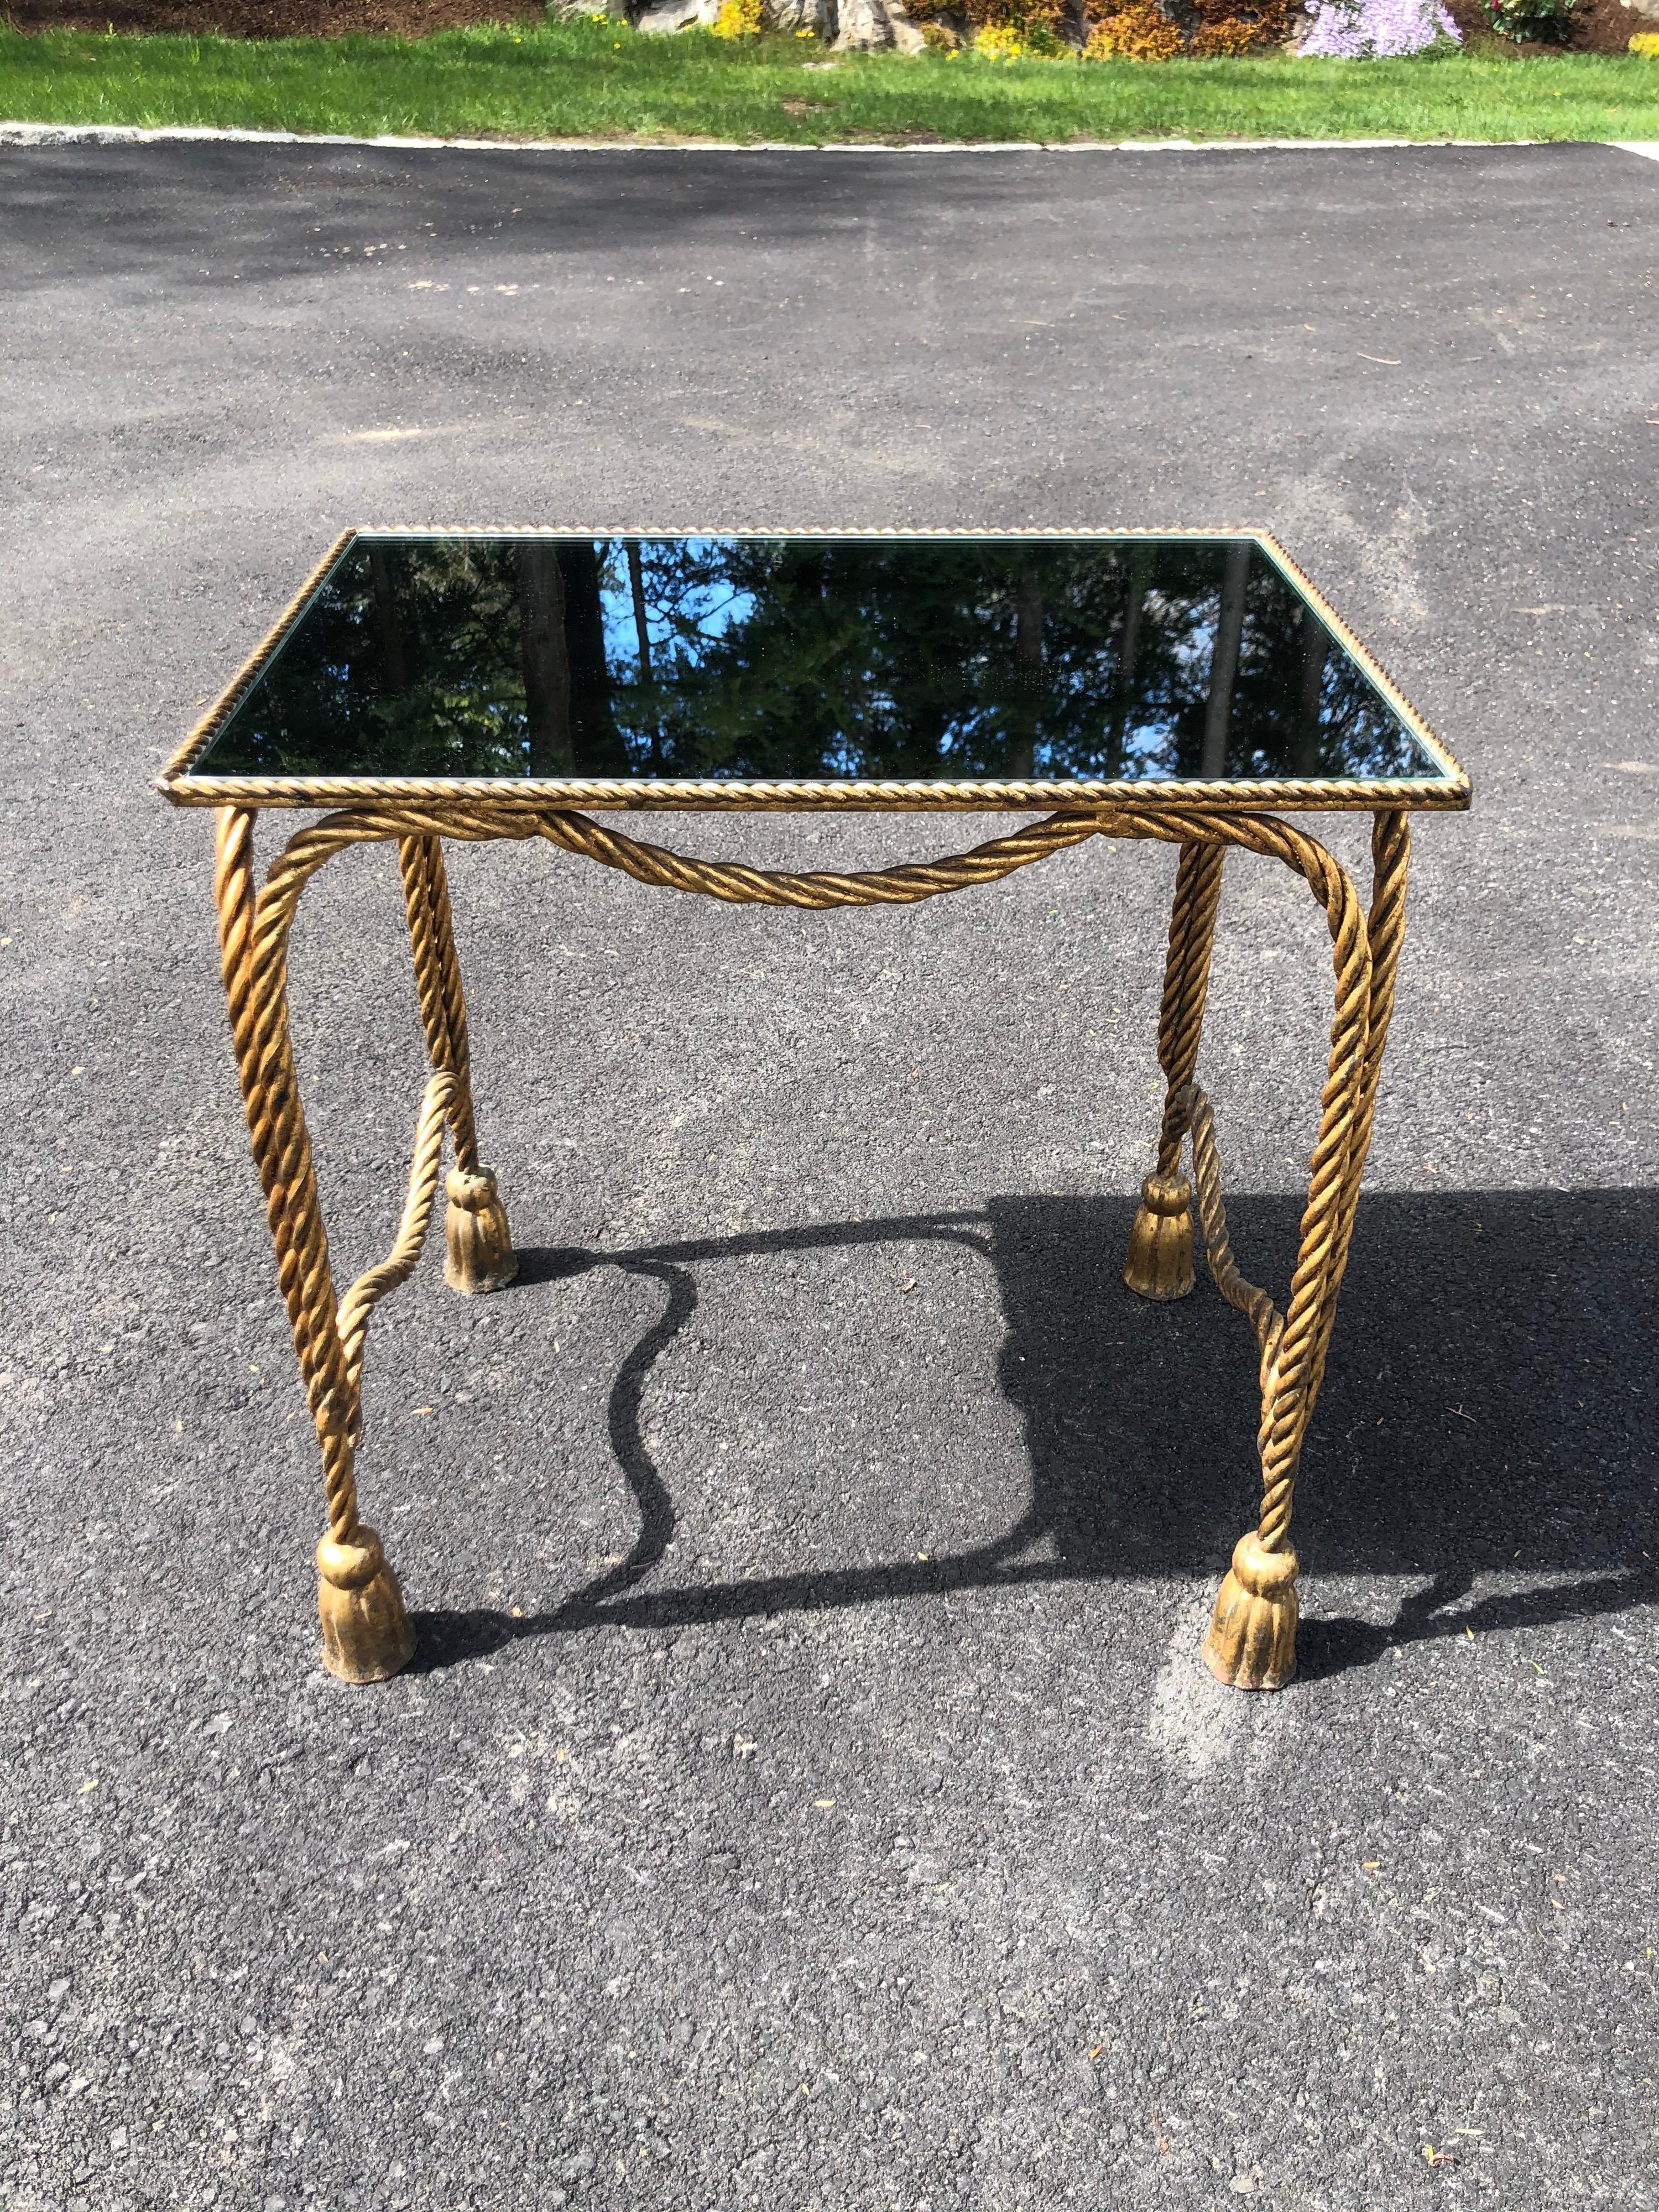 Italian gilt rope design table with mirror top. Perfect decorative side table. Elegant and sophisticated. Great for any room, even a bathroom. This item can parcel ship for under $100. Please provide a zip code for a quote.
    